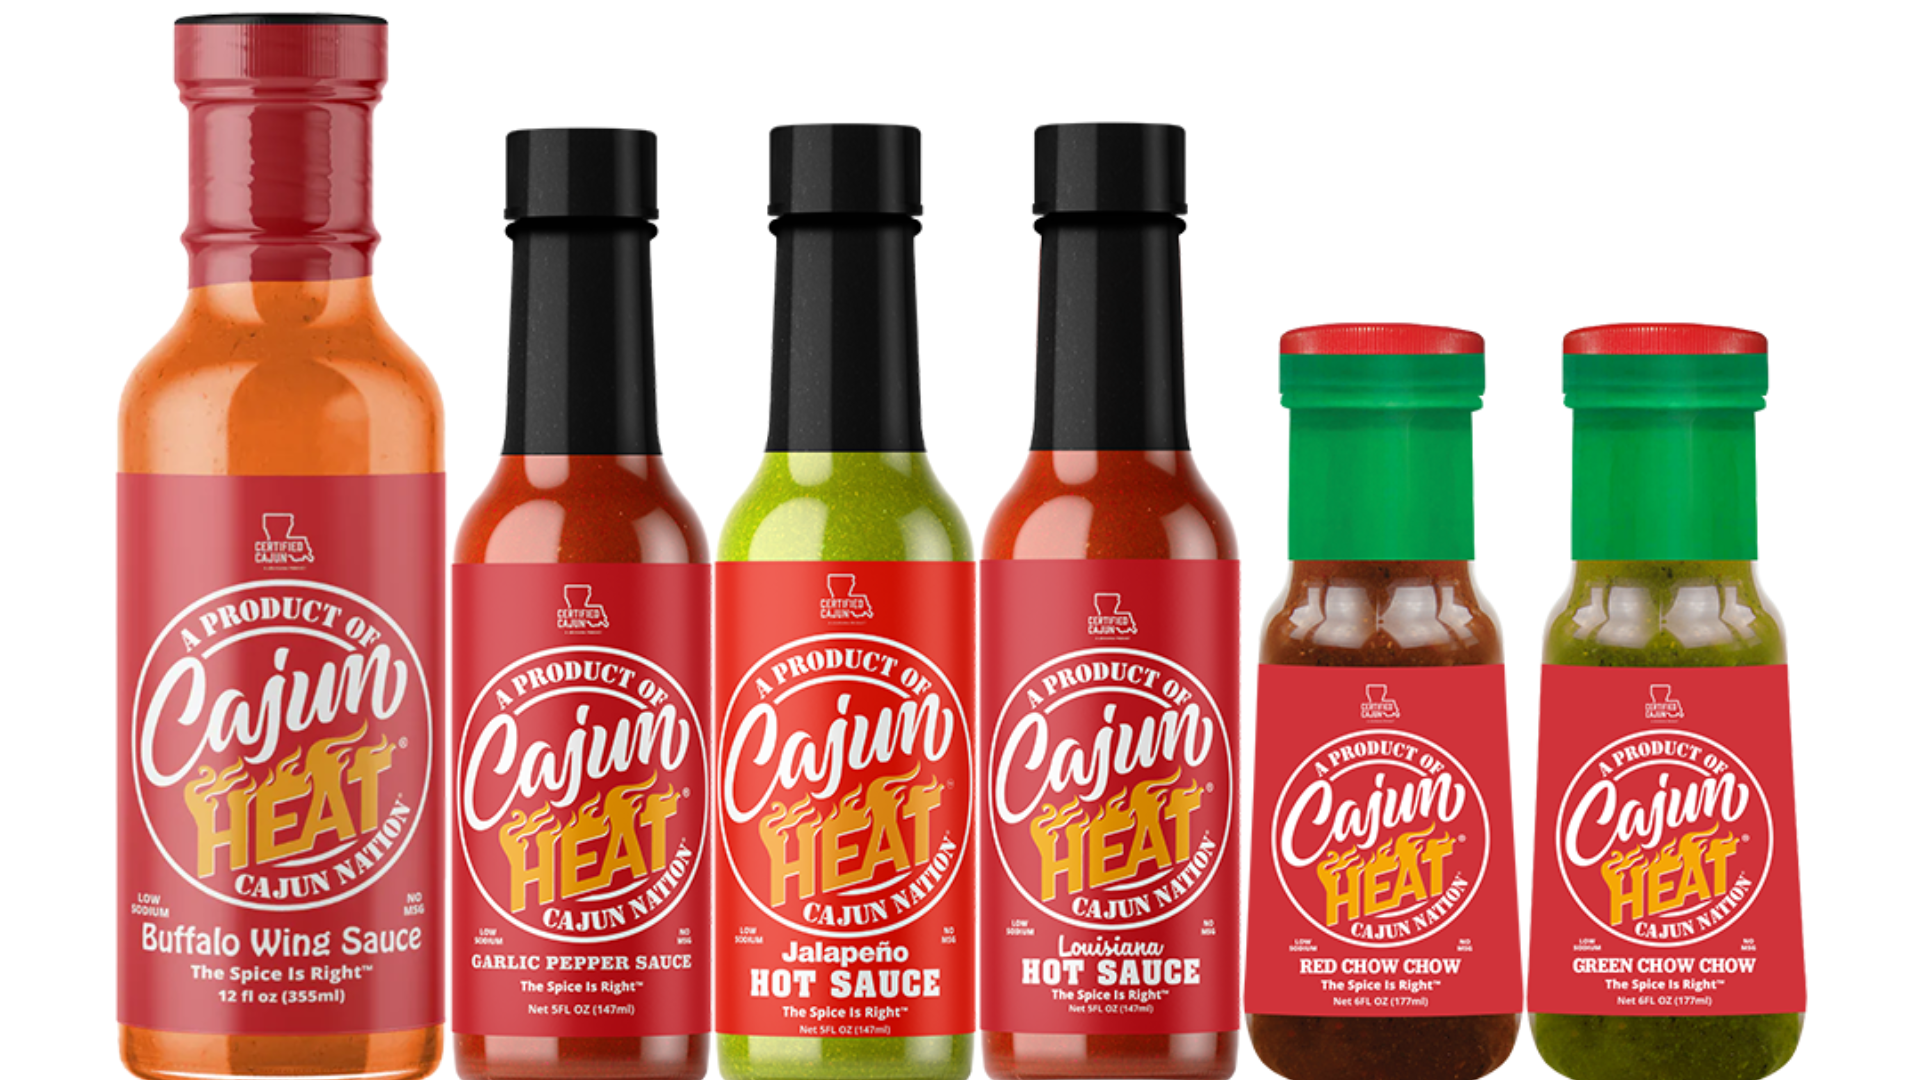  Cajun Heat - The Spice Is Right Collection: LOW SODIUM with No MSG 1-Cajun Heat Garlic Pepper Sauce 1-Cajun Heat Chow Chow Cajun Red Pepper  1-Cajun Heat Chow Chow Cajun Green Pepper  1-Cajun Heat Louisiana Hot Sauce 1- Cajun Heat Jalapeno Hot Sauce 1- Cajun Heat Buffalo Wing Sauce